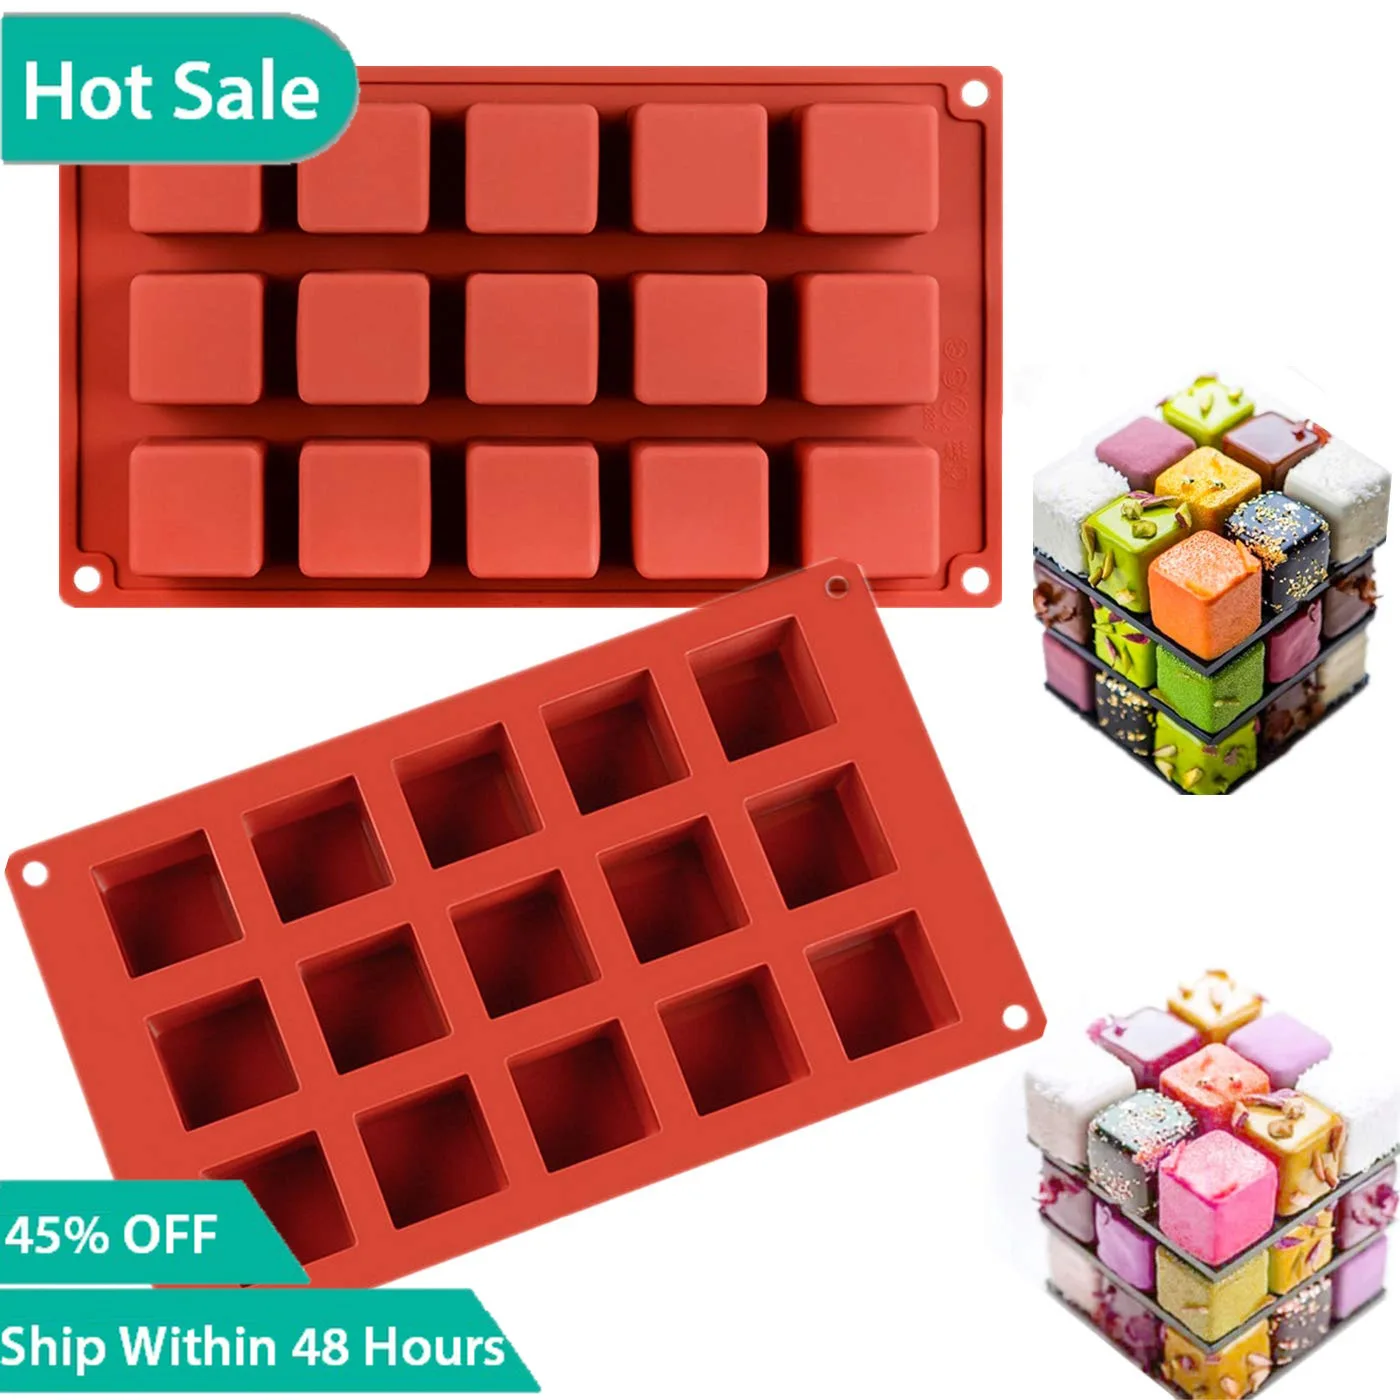 

3D Square Silicone Mold Square Mousse Cake Baking Mold Dessert Molds for Cheesecake/Jelly/Brownie/Soap/Candle (15-Cavity)